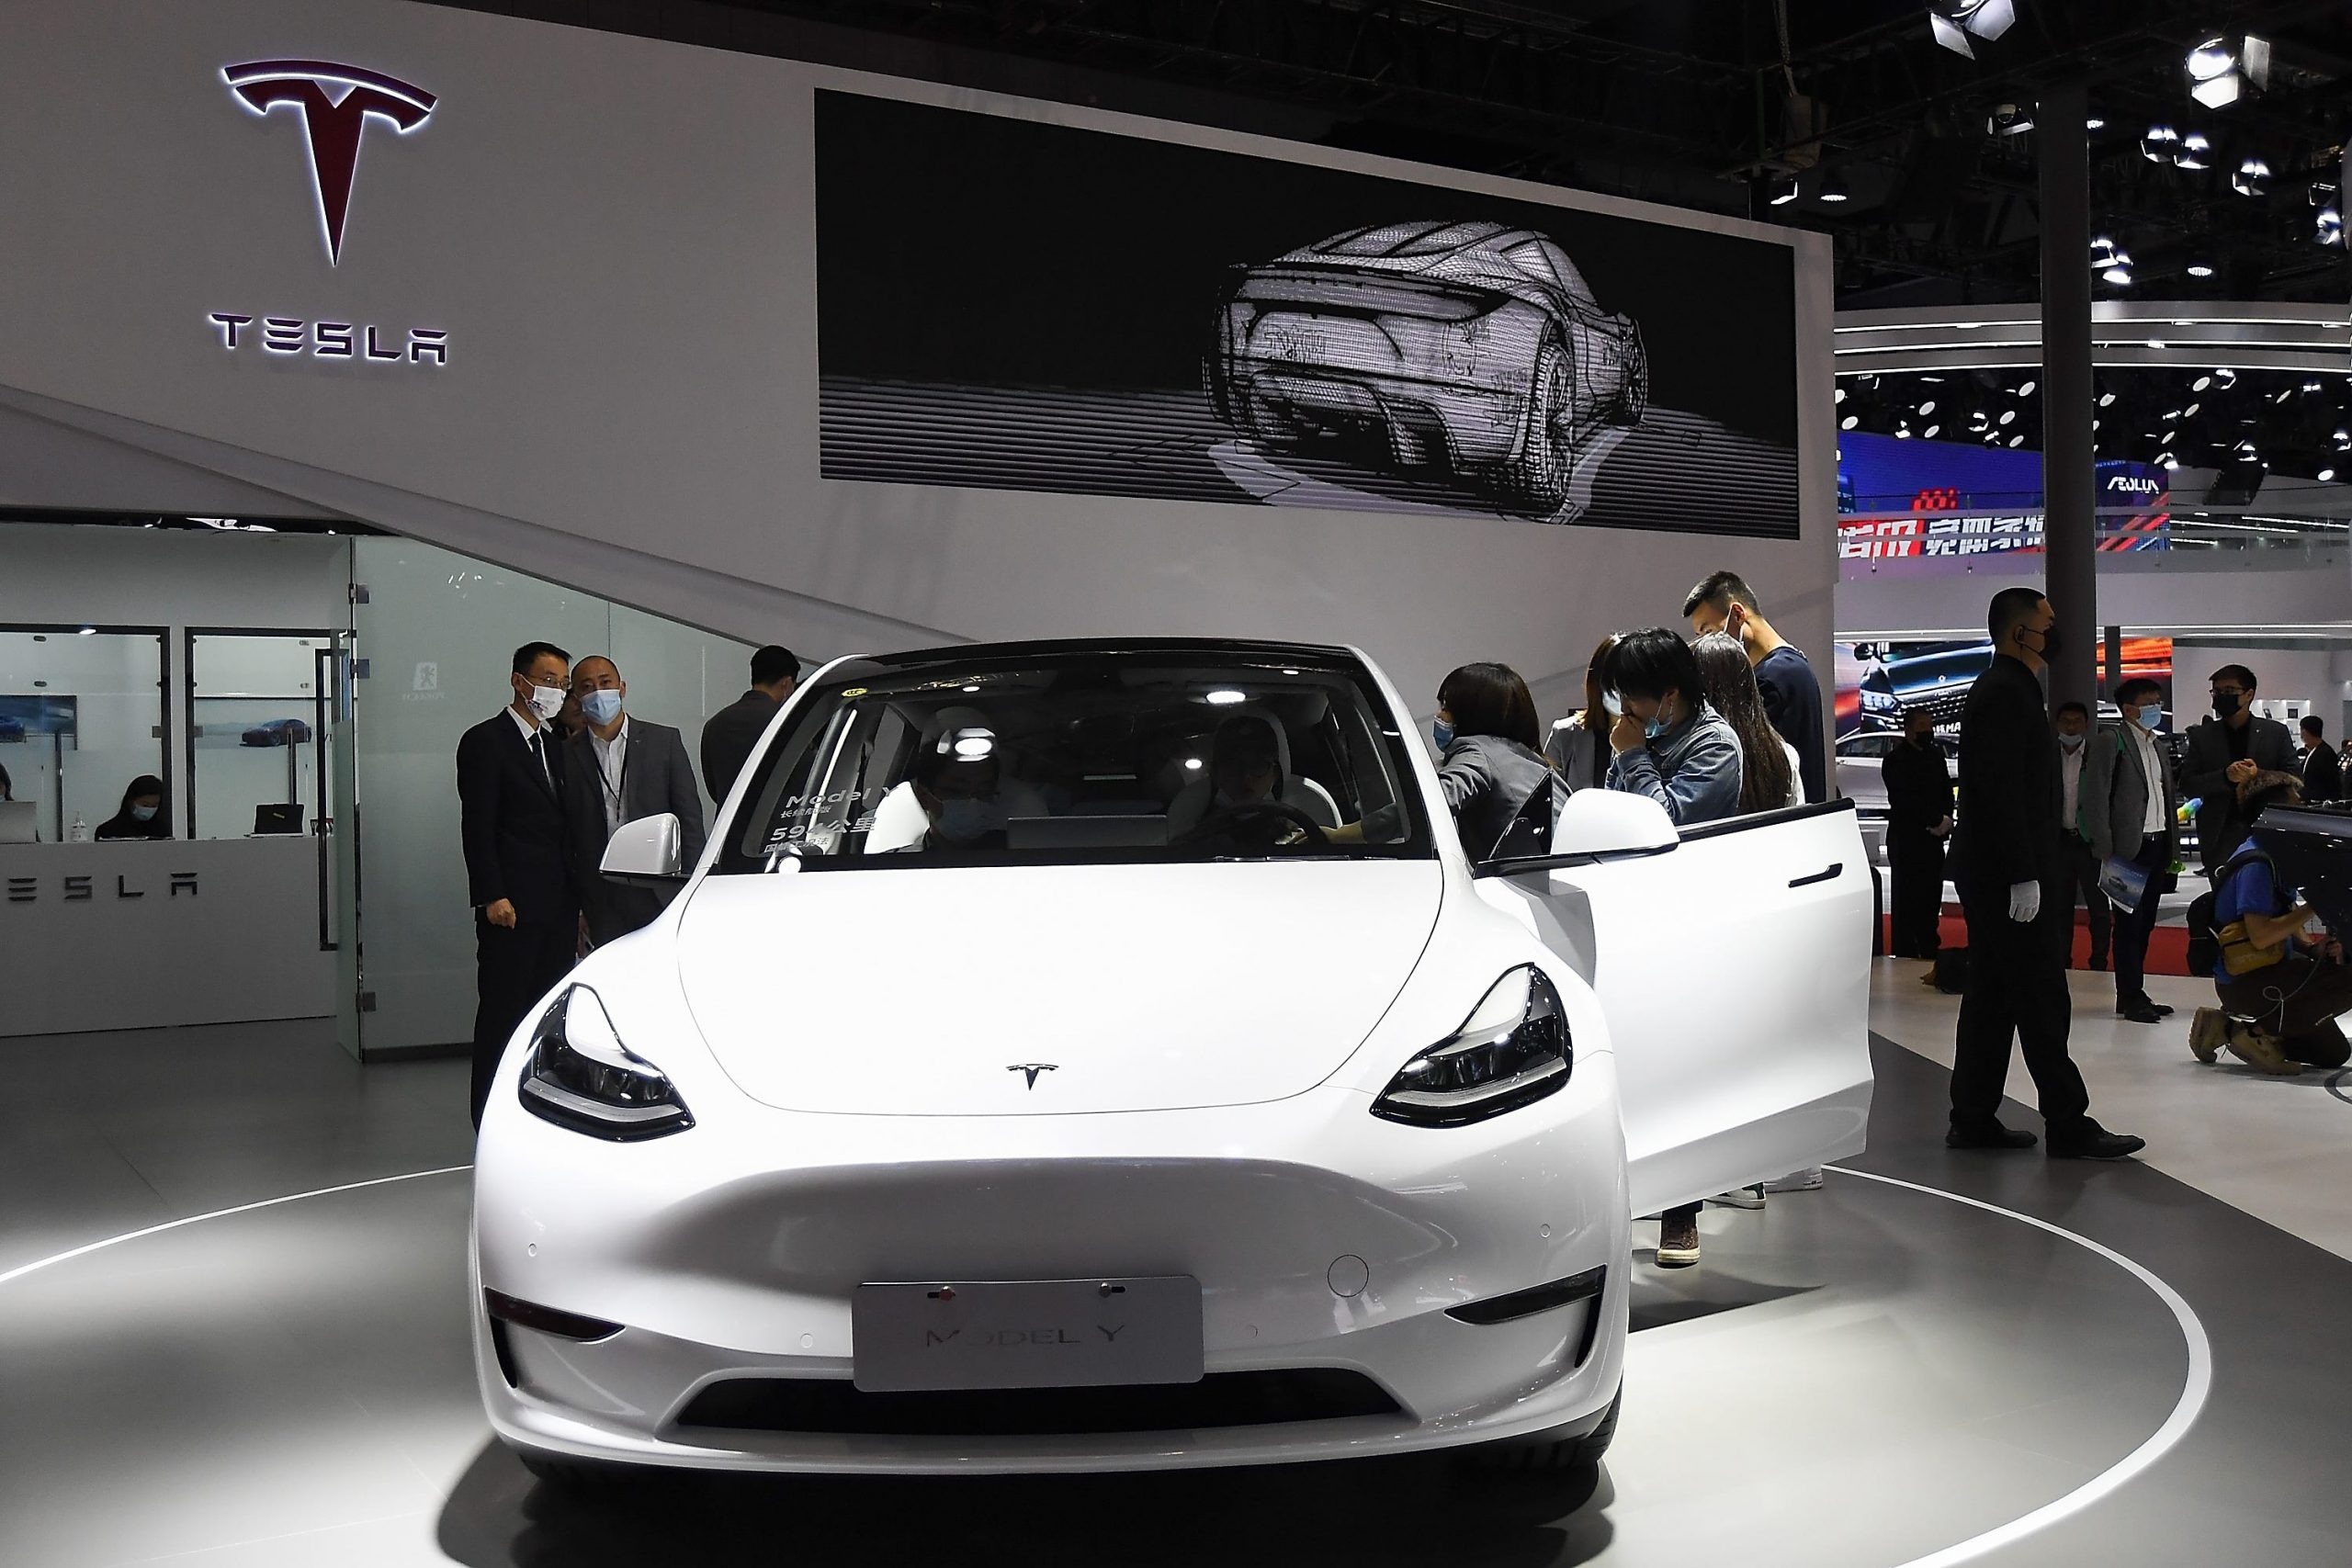 A white Tesla Model Y sits in a showroom with people walking around it.